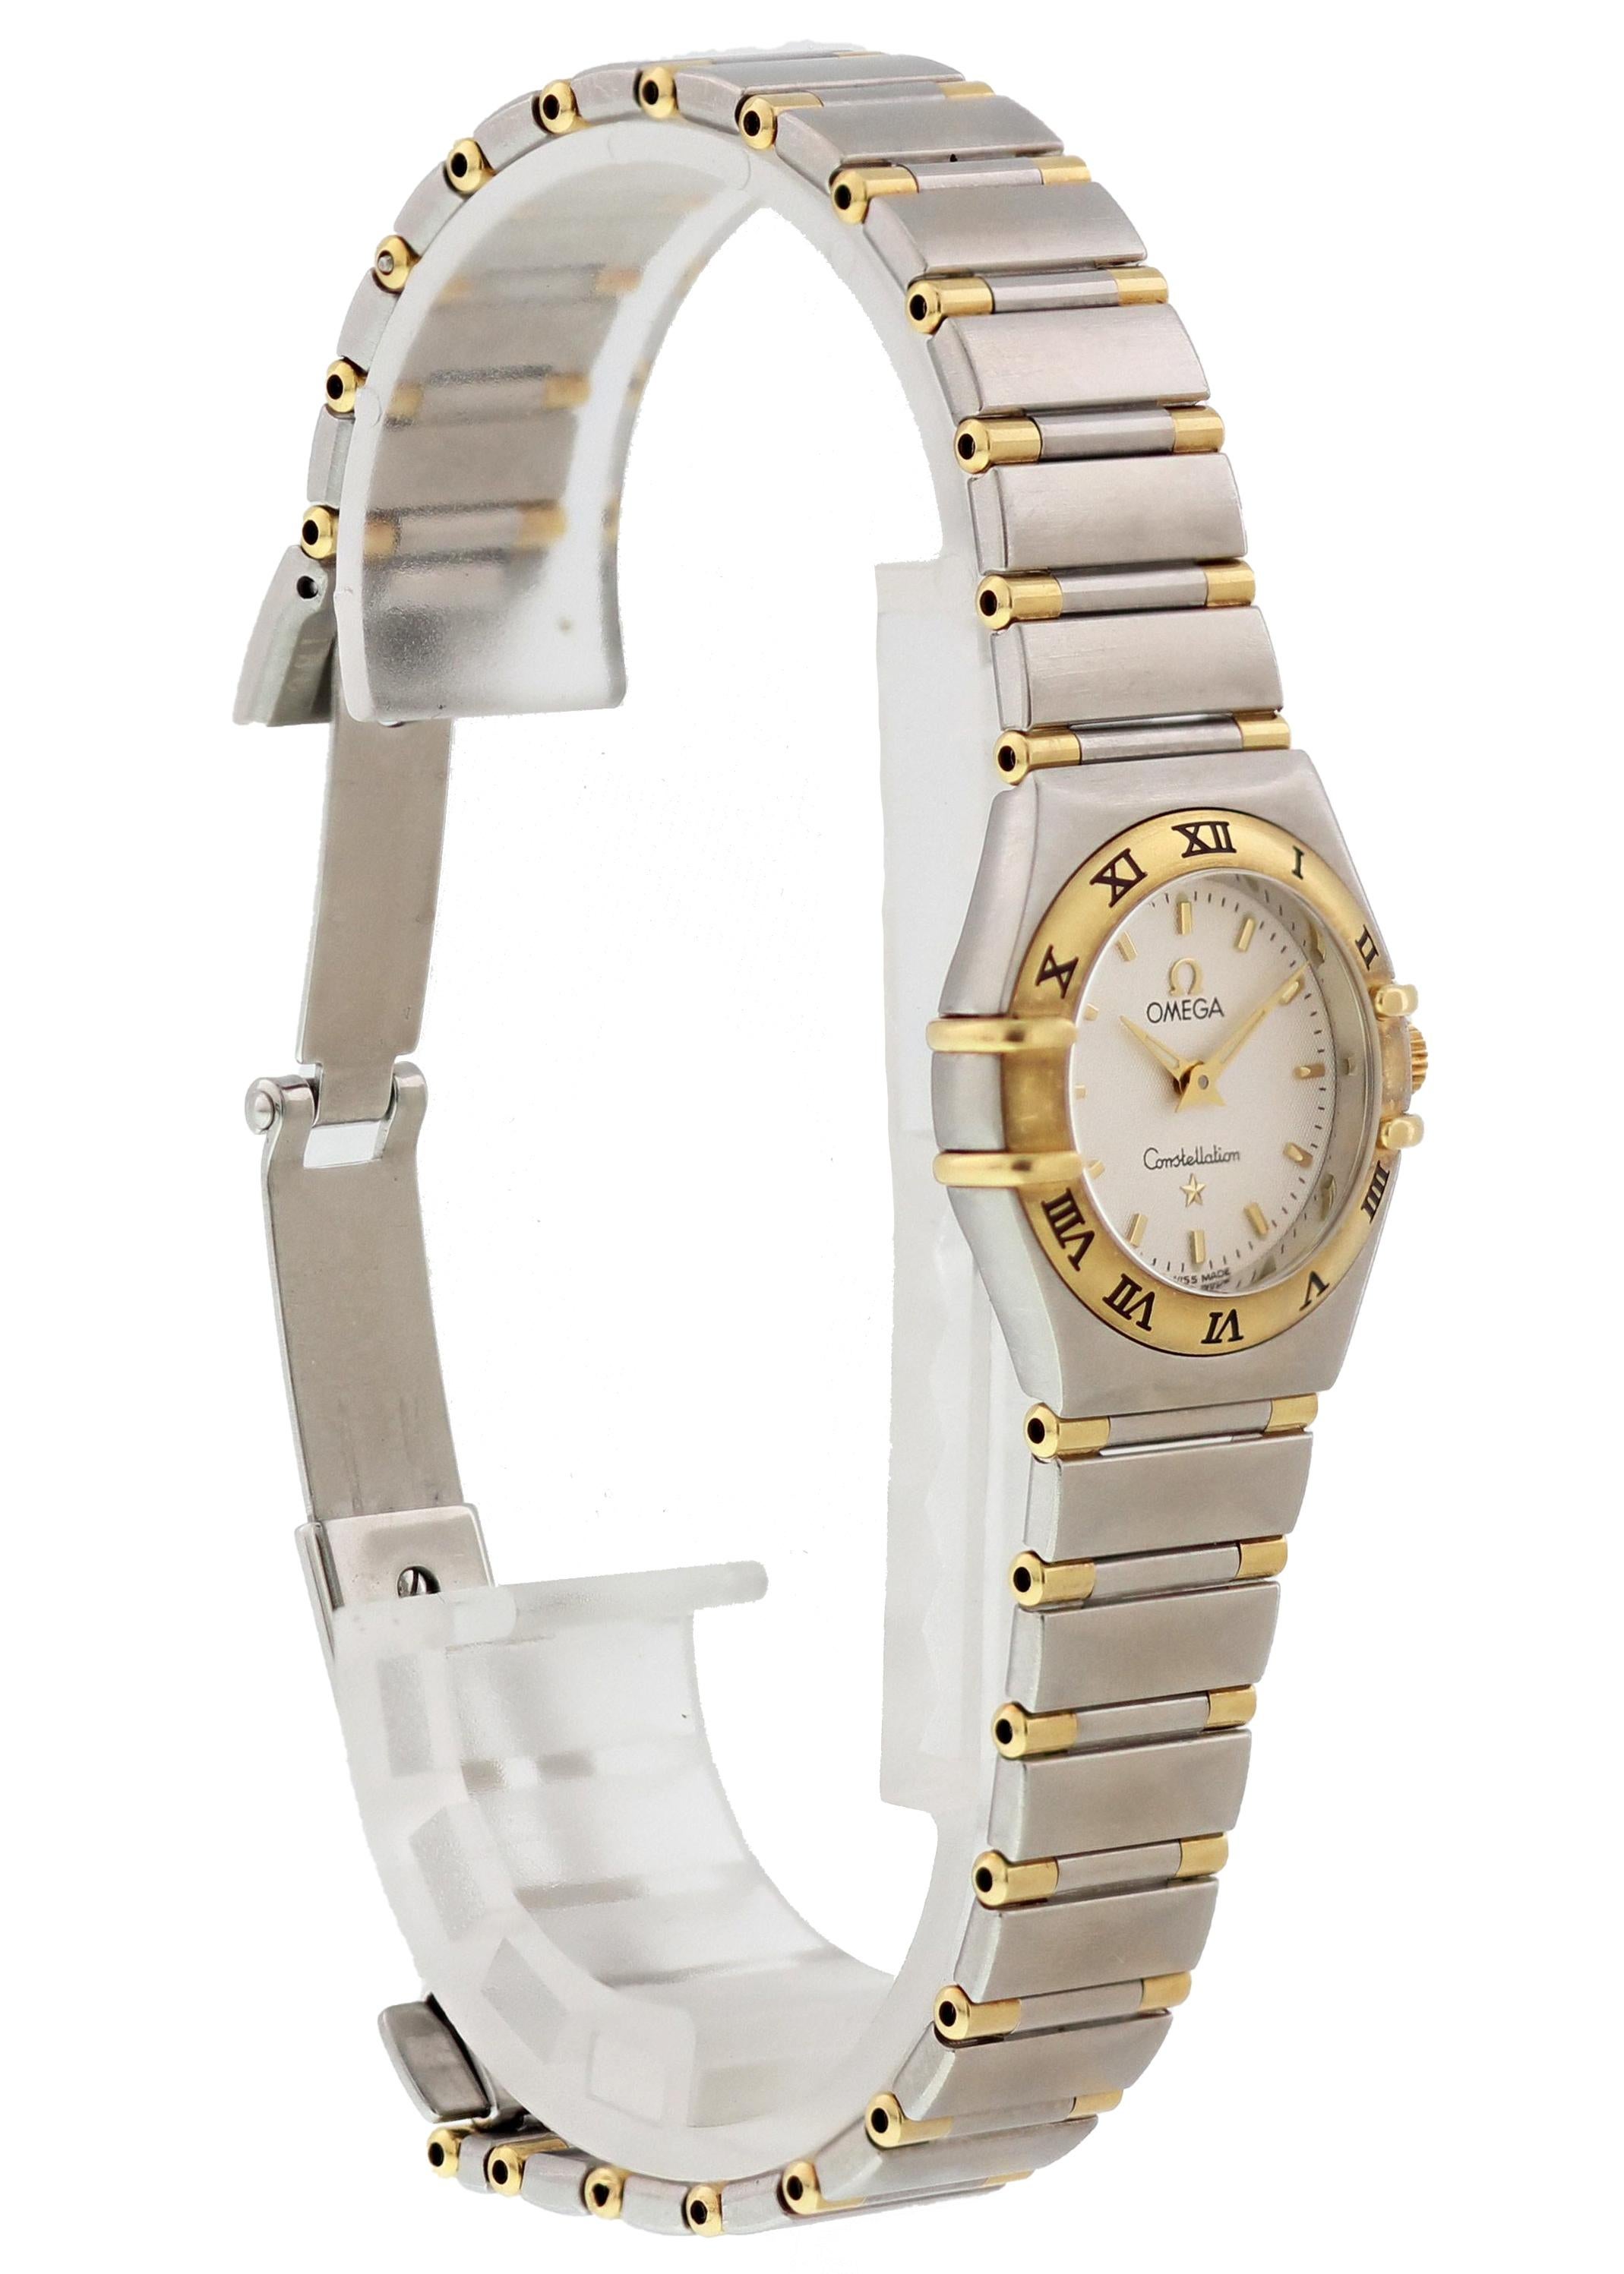 Omega Constellation Ladies Watch In Excellent Condition For Sale In New York, NY